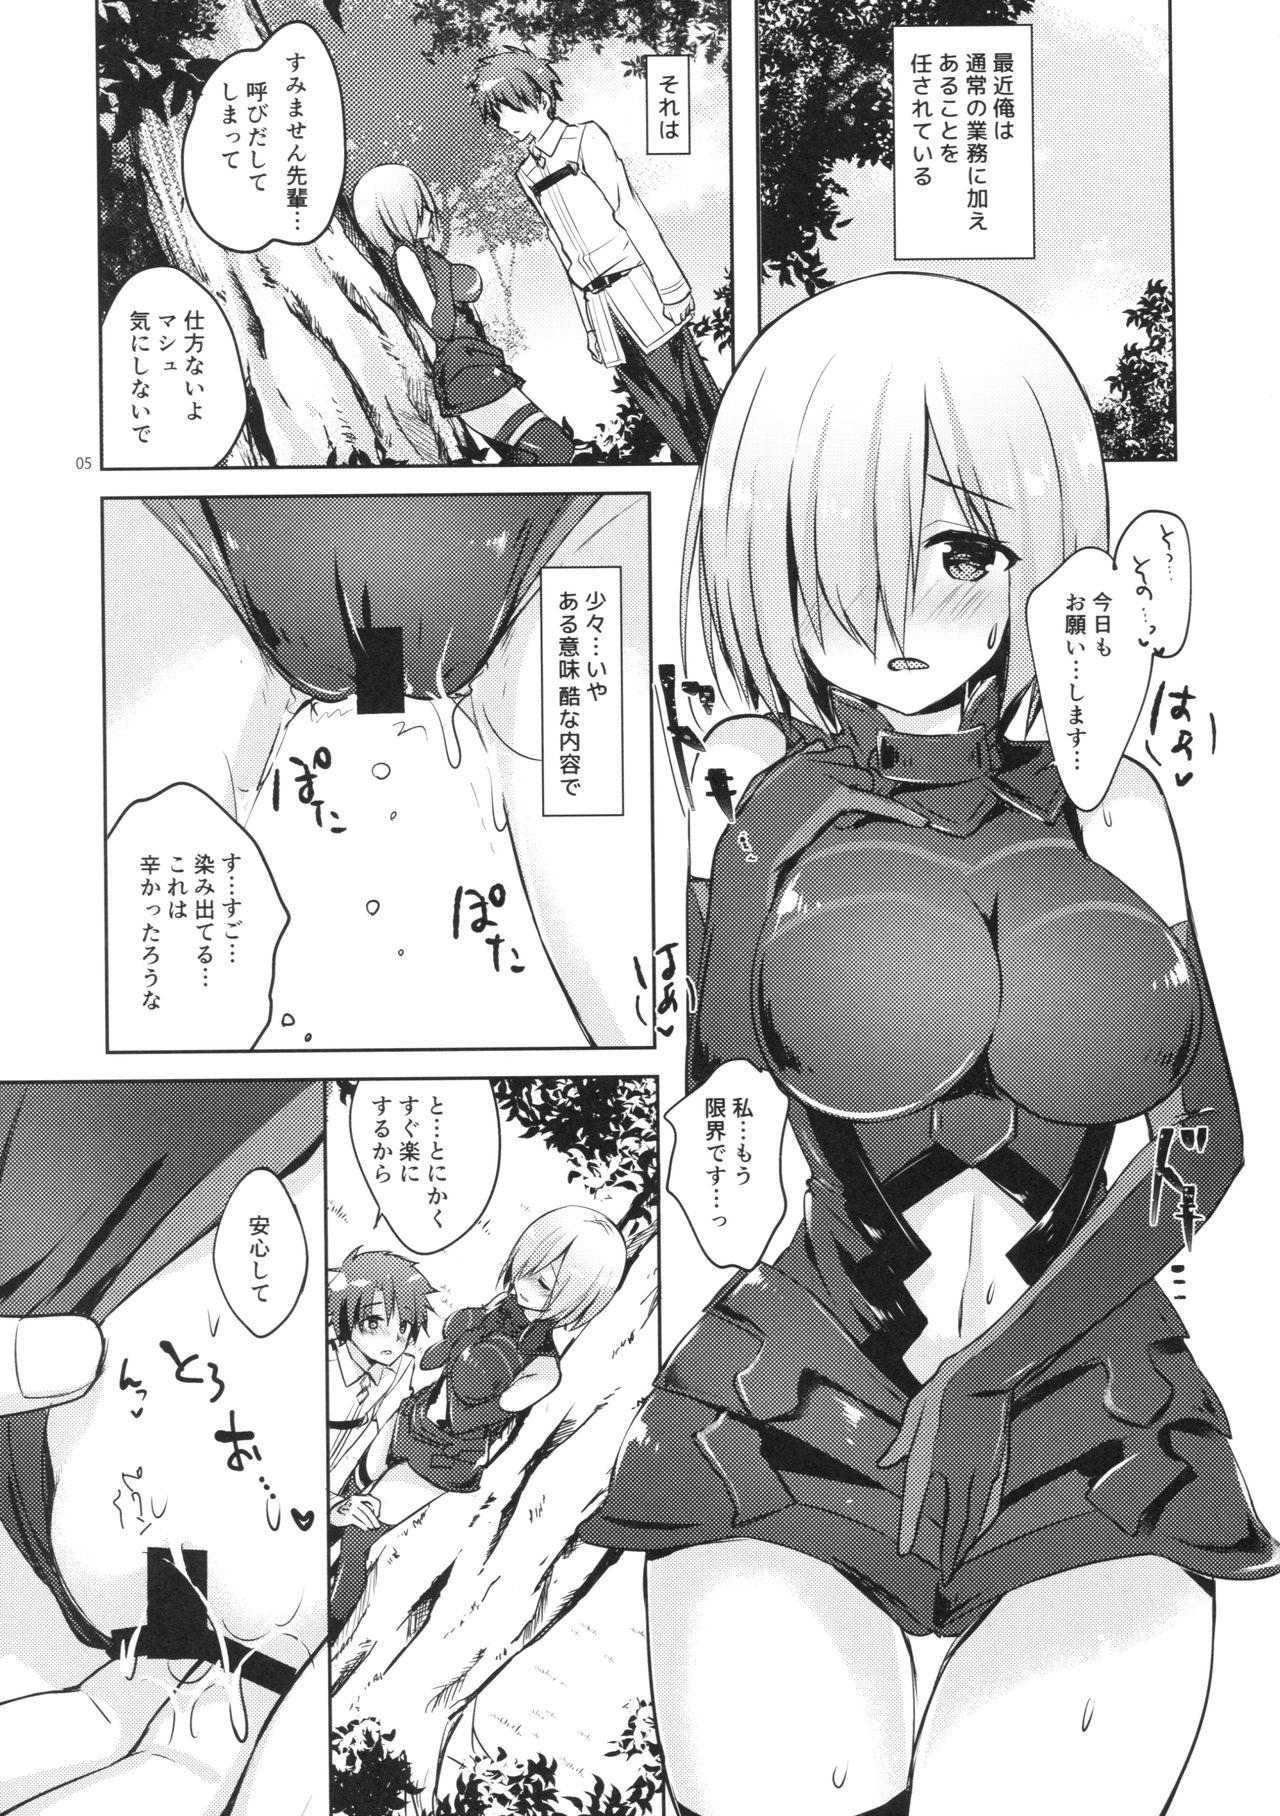 Swallowing Mash/Hatsujou Order - Fate grand order Twistys - Page 4